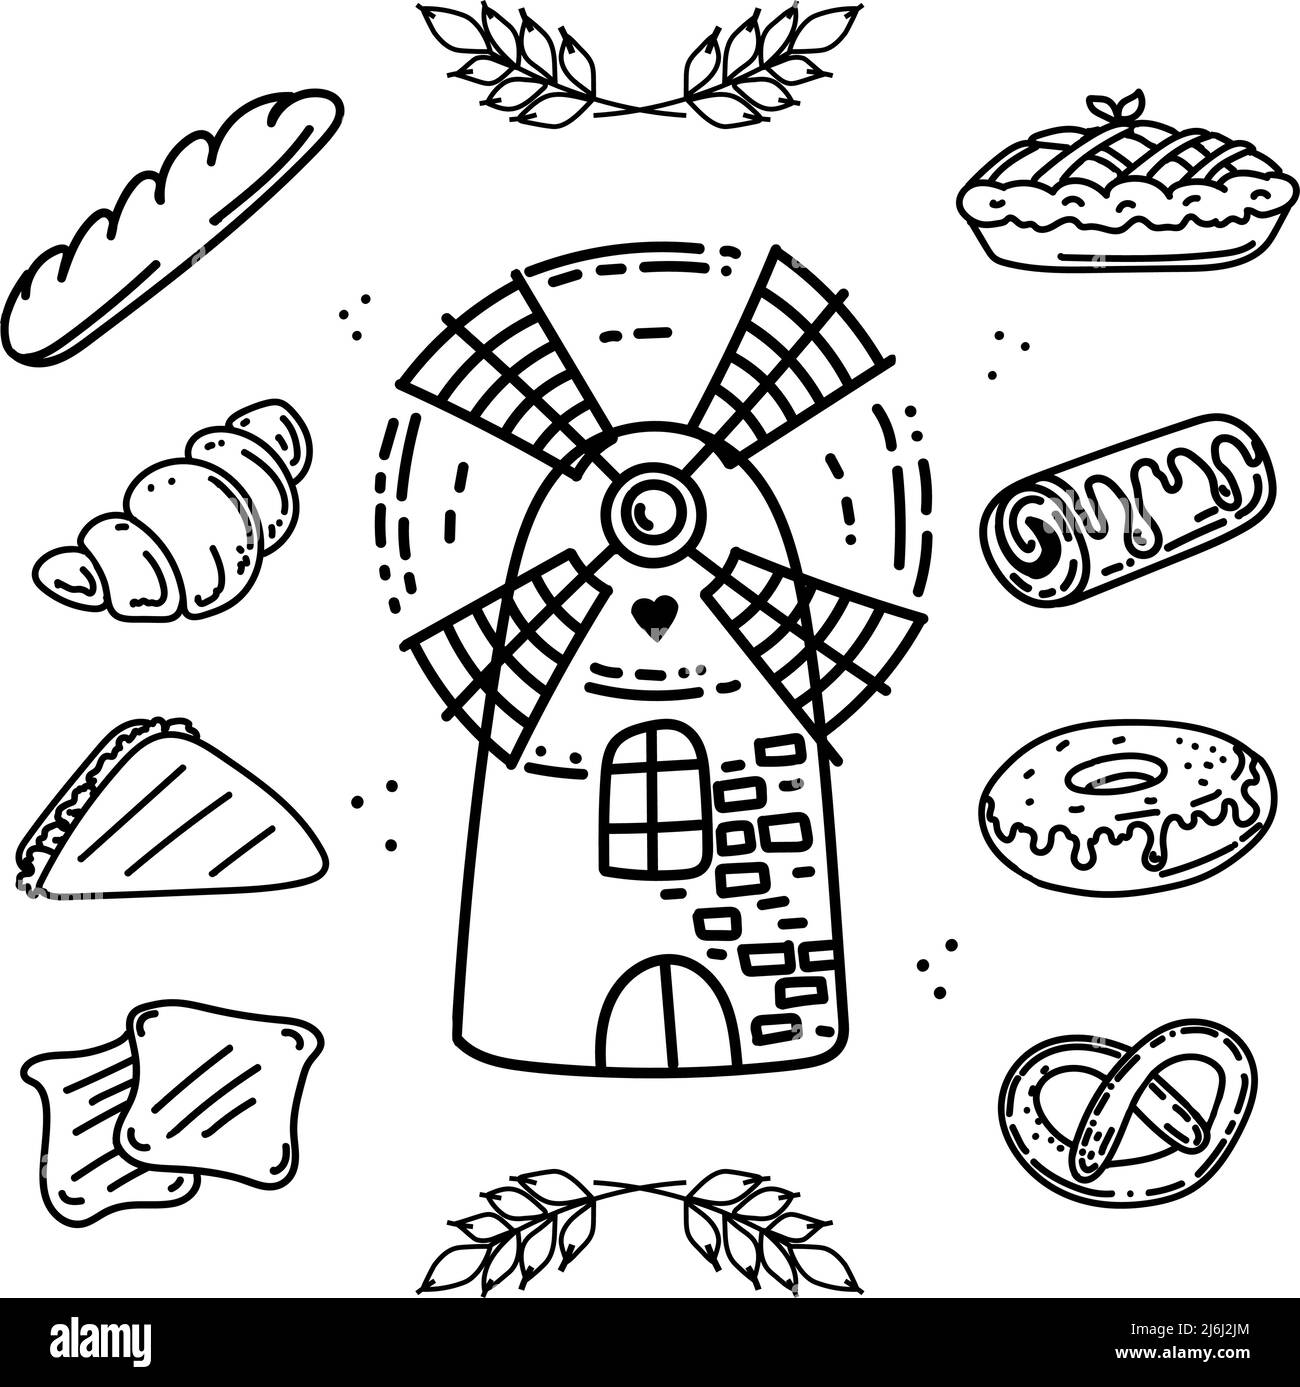 Set of baked goods, hand-drawn elements in doodle style. Mill for grinding grain. Flour products: bread, bagel, croissants and sandwich. Spike of whea Stock Vector